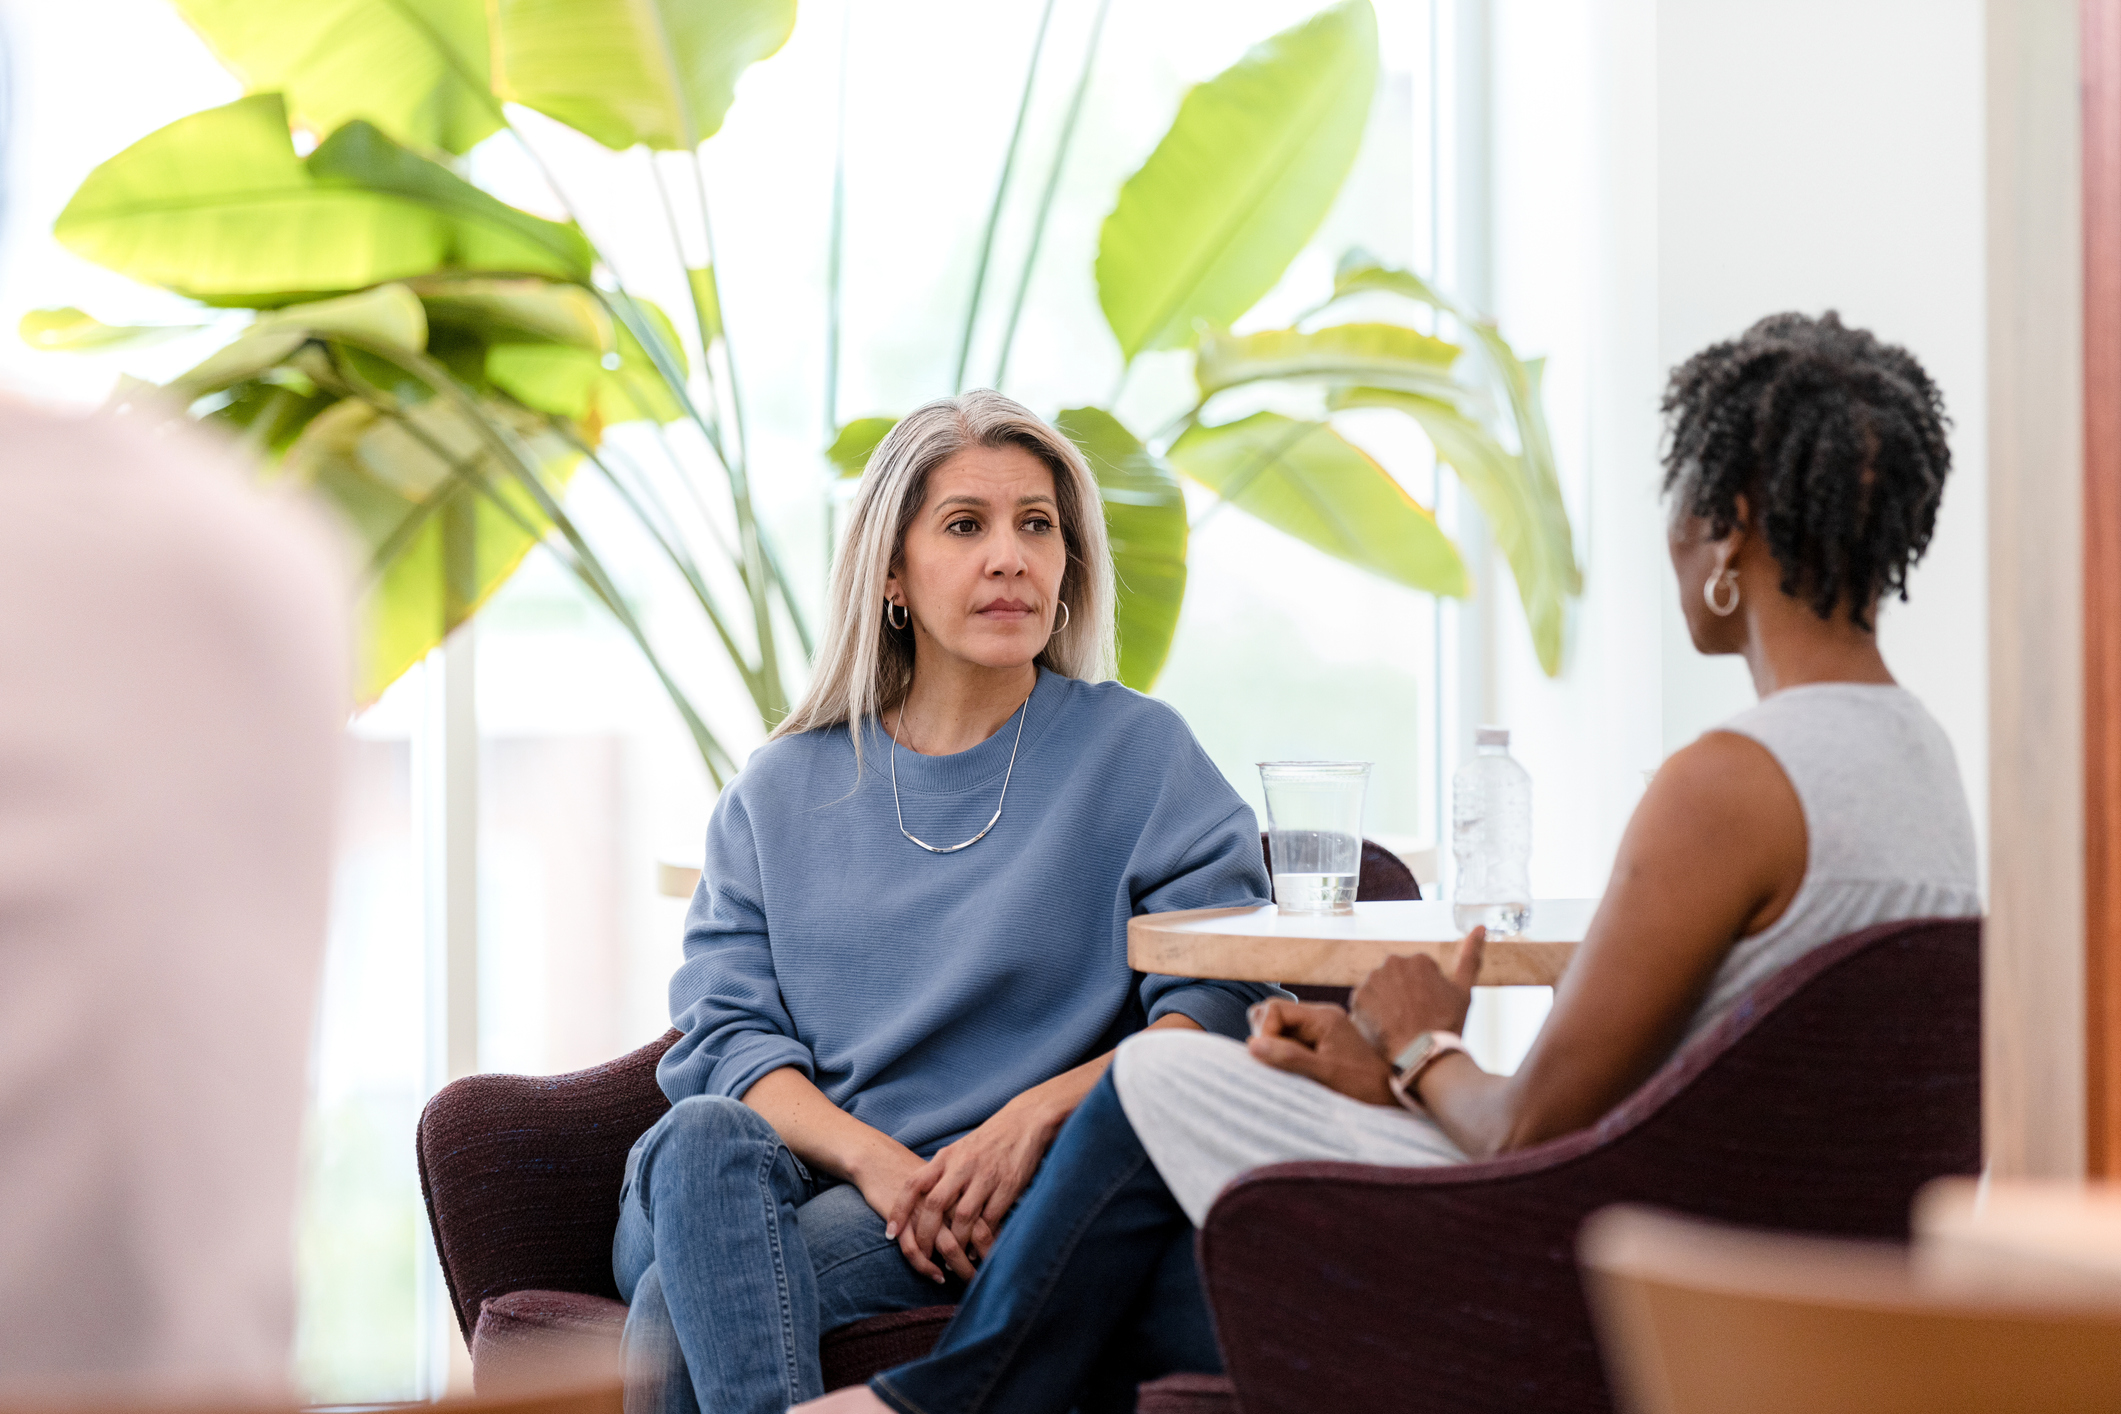 Therapist listening to a client | Source: Getty Images